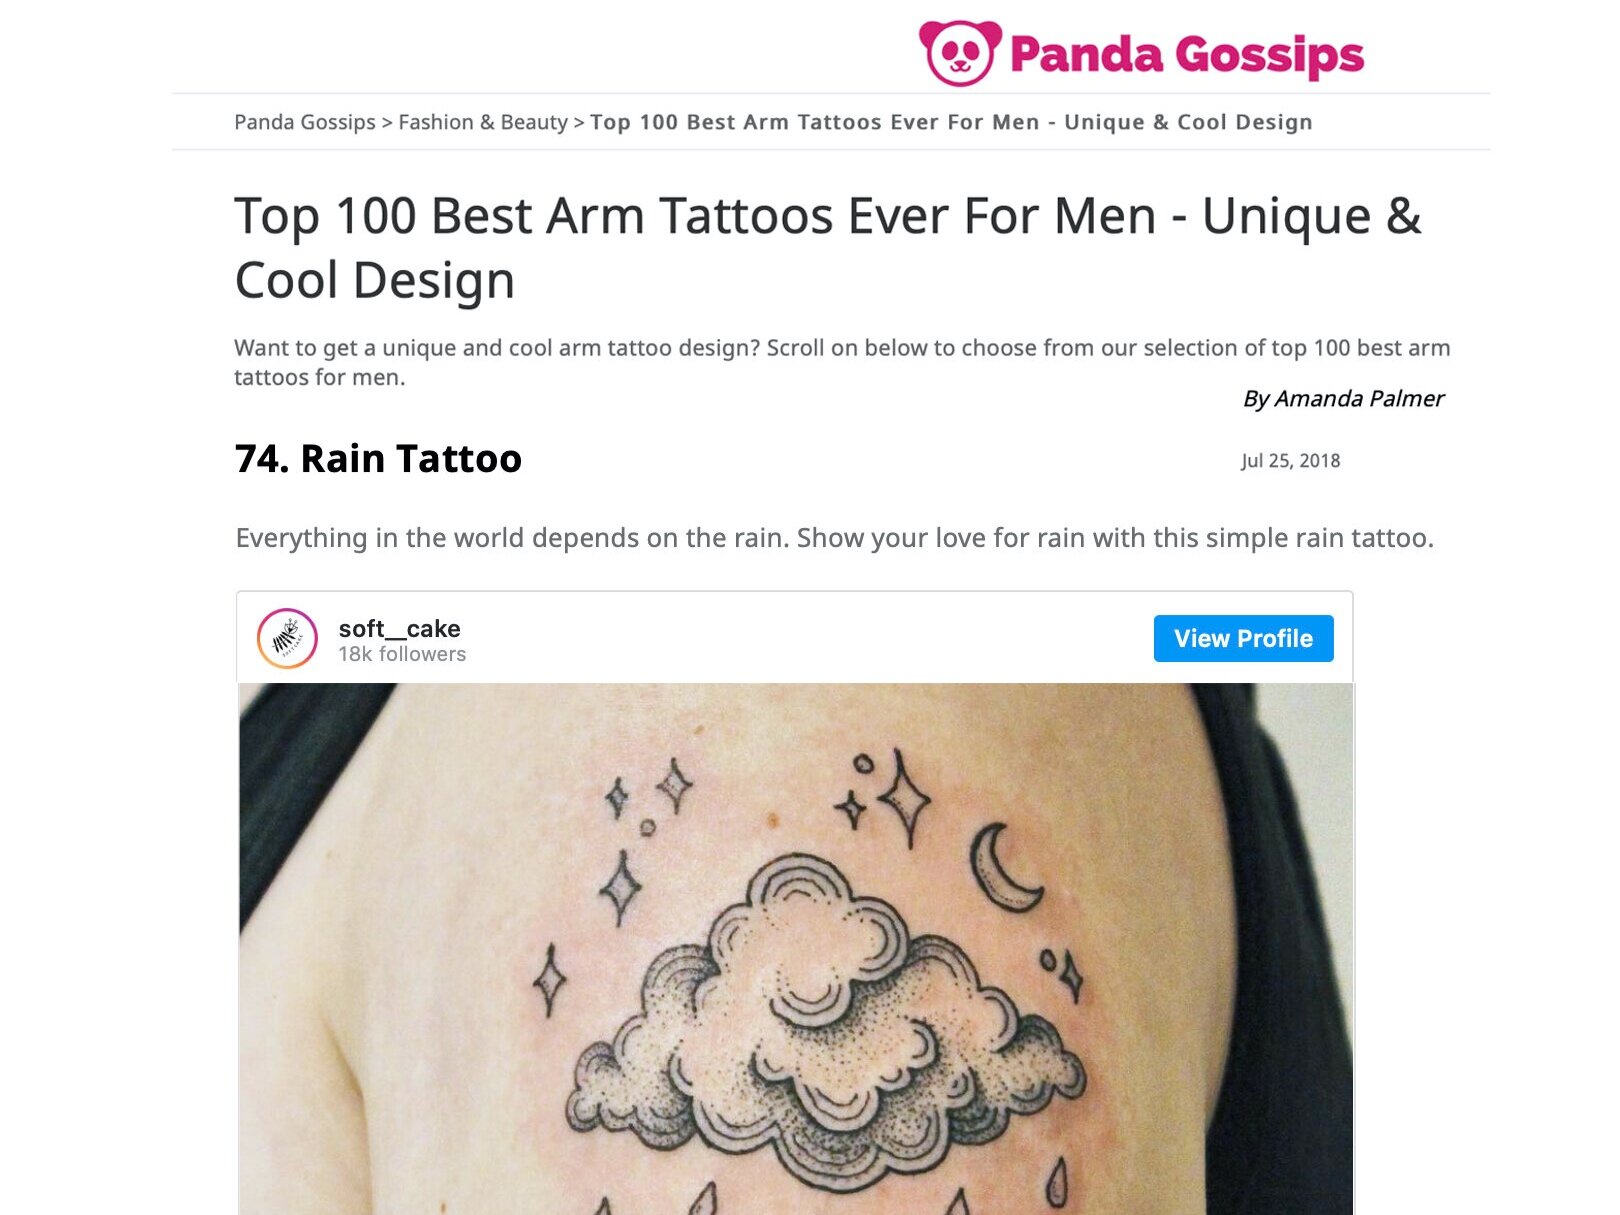 Unleash The Fire Within With These 100 Dragon Tattoo Ideas | Bored Panda